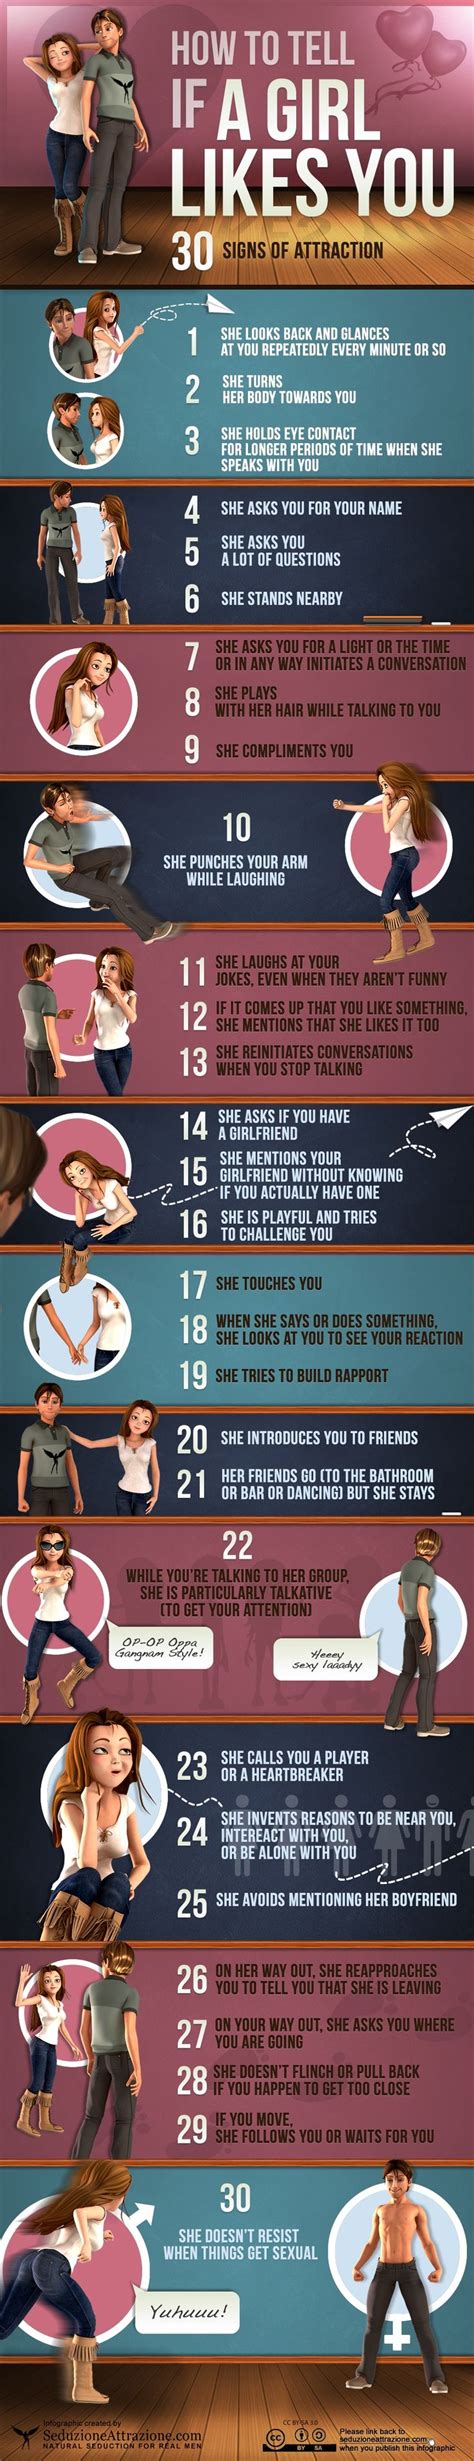 30 Signs Of Attraction If A Girl Likes You Infographic Infographics Signs Of Attraction A